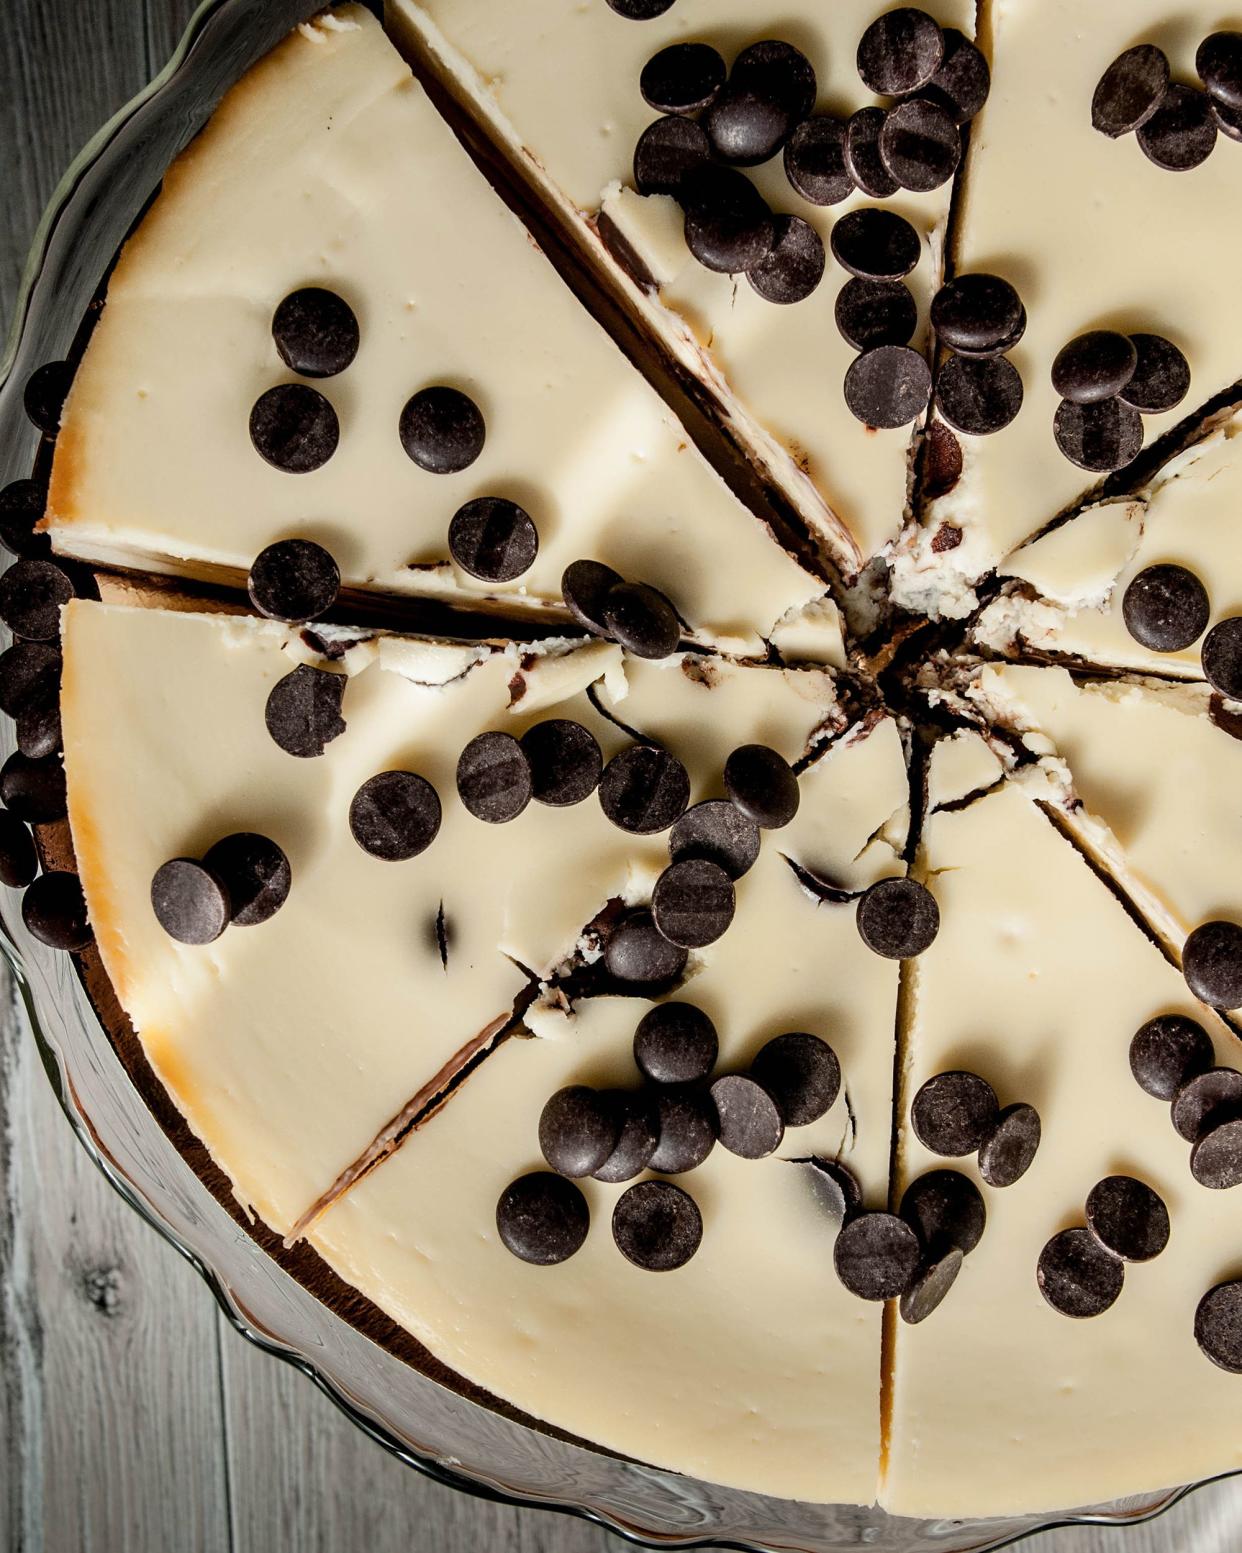 Top view of chocolate chip cheesecake in a glass pie dish with a grey wooden table background